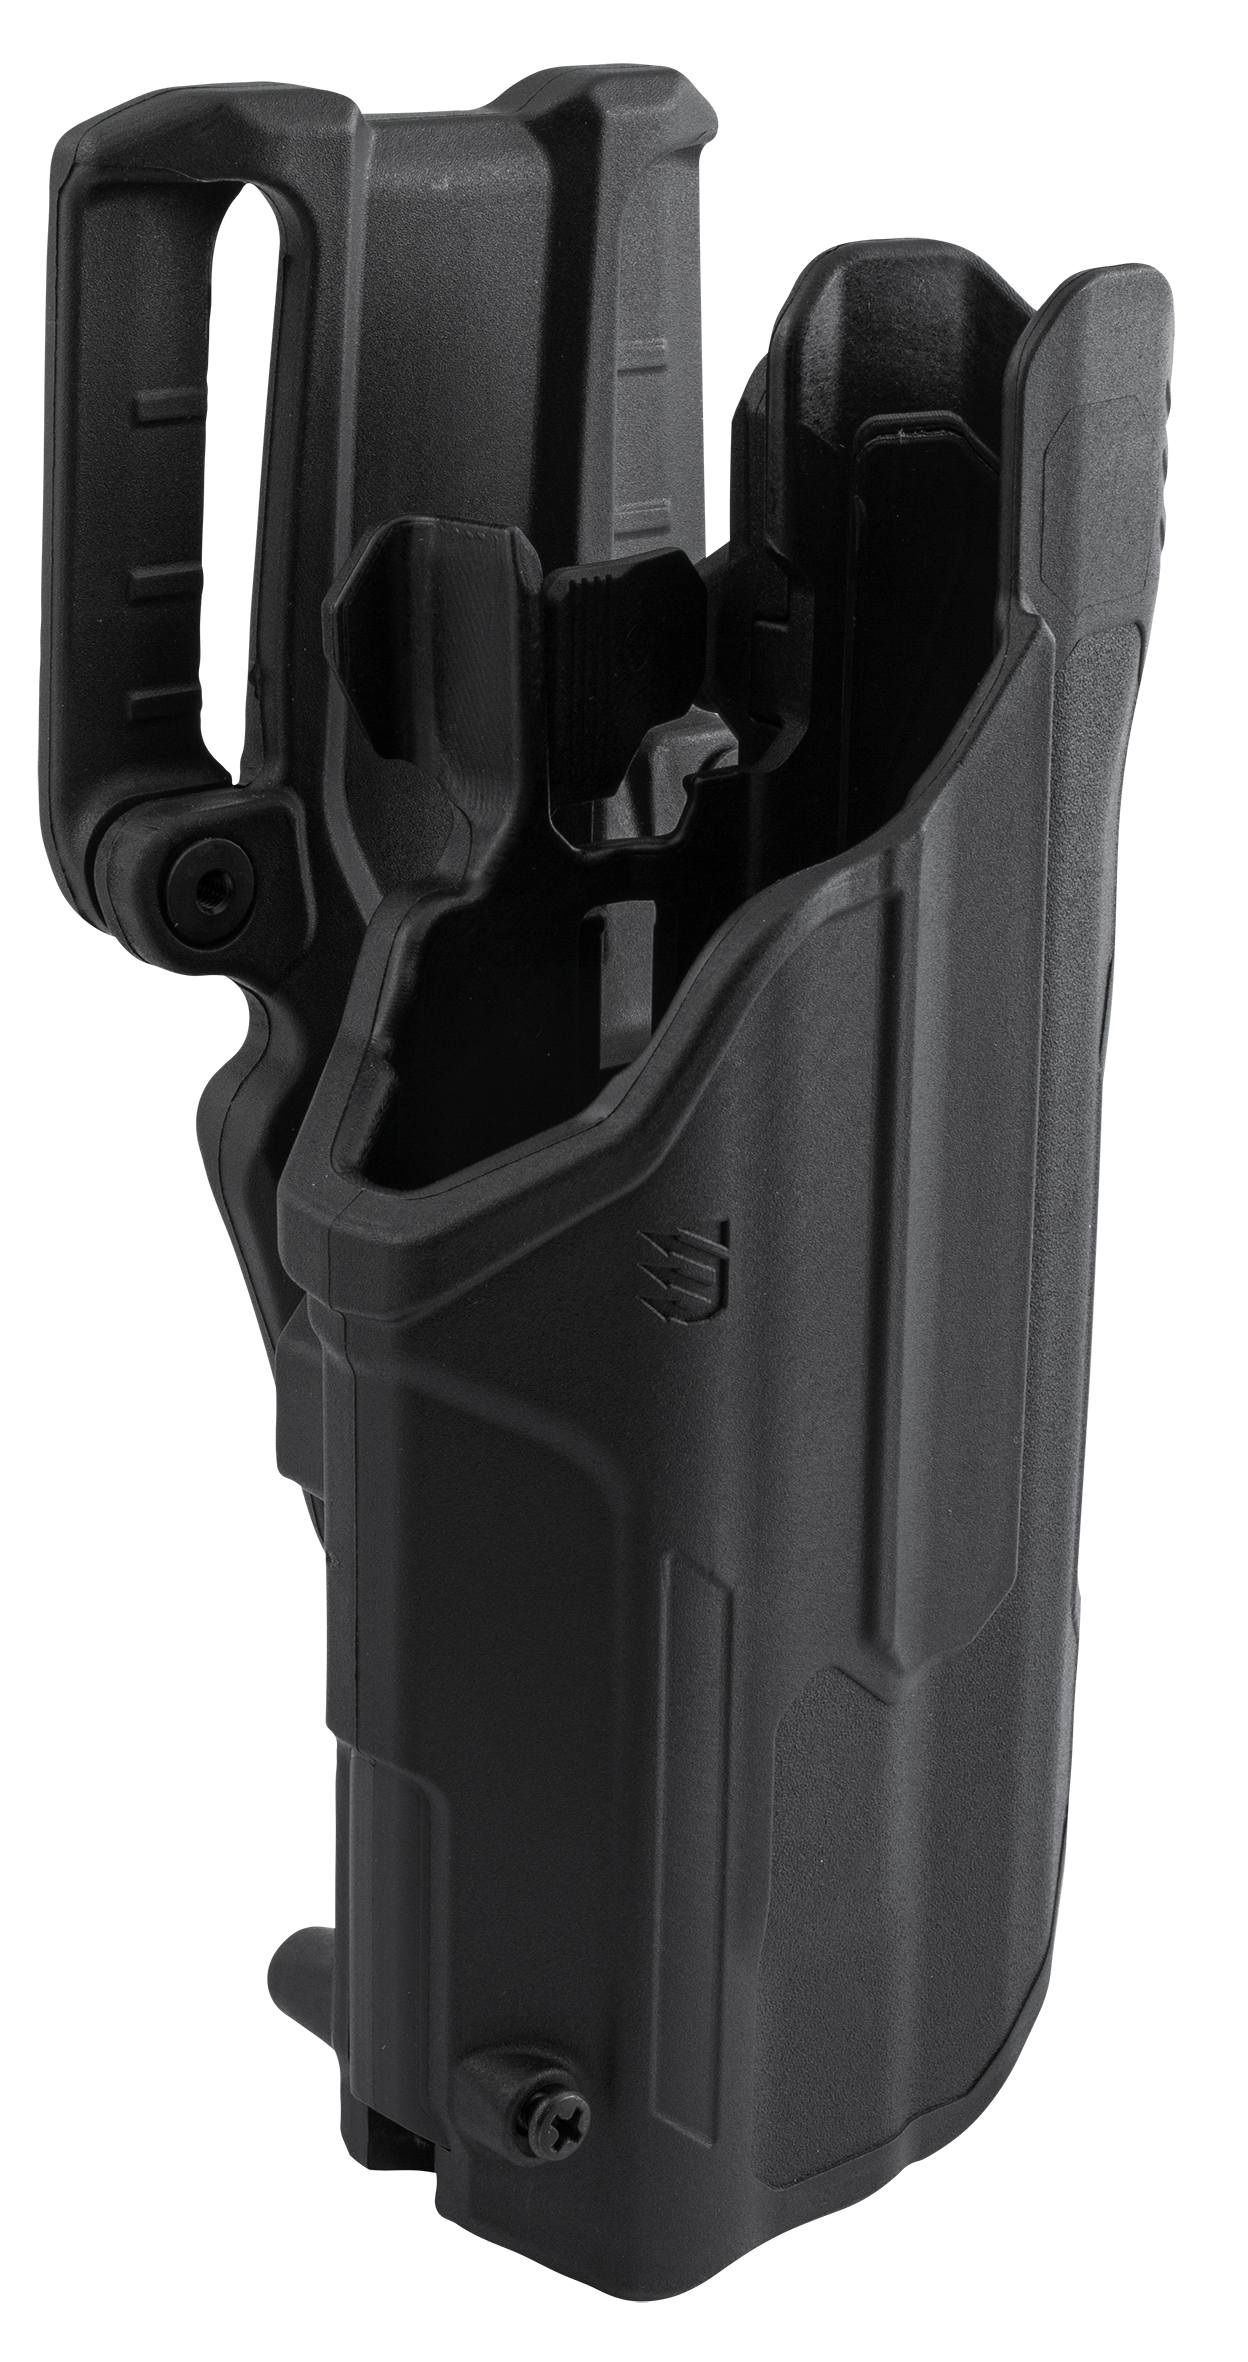 Details about   BLACKHAWK T-Series Duty Holster Right Hand Black Fits Glock 17/19/22/31 Polymer 